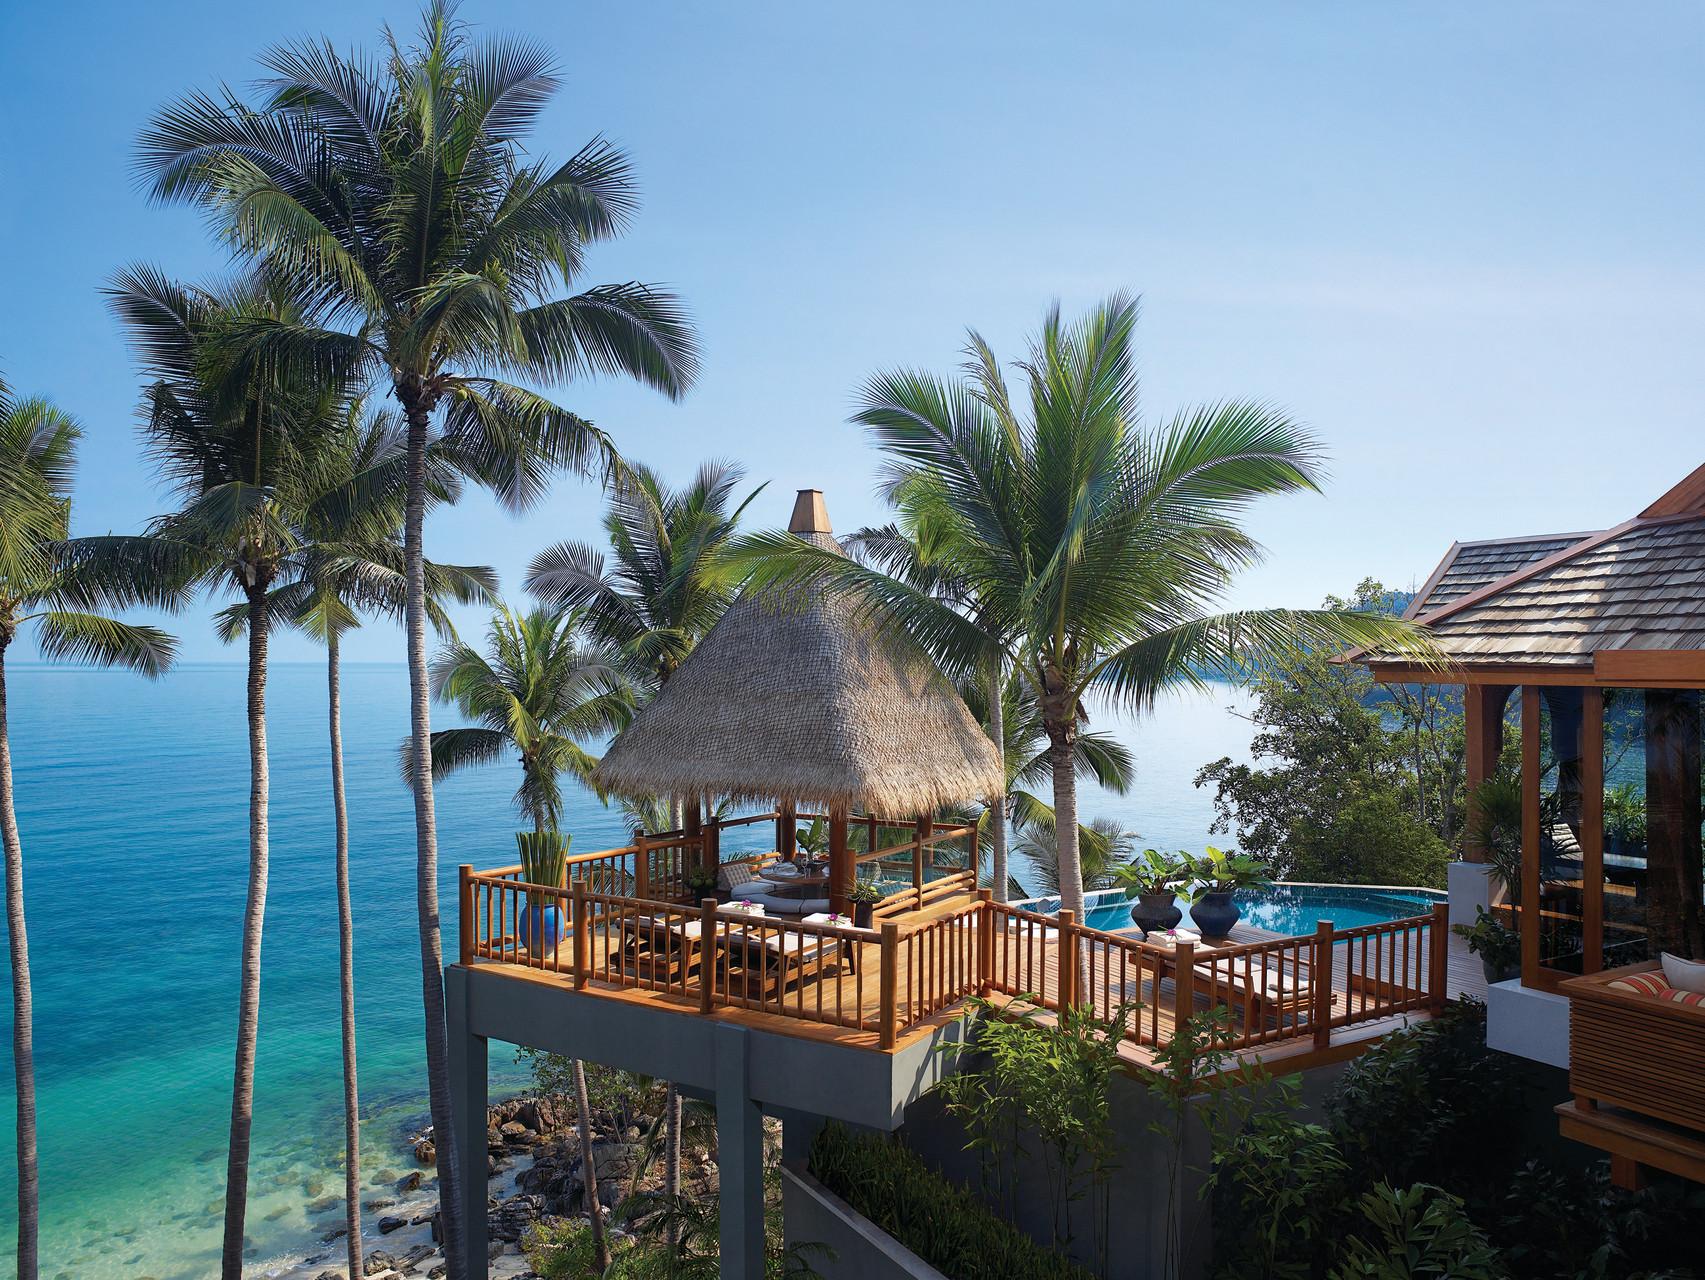 Four Seasons Resort Koh Samui - Where to stay in Thailand?